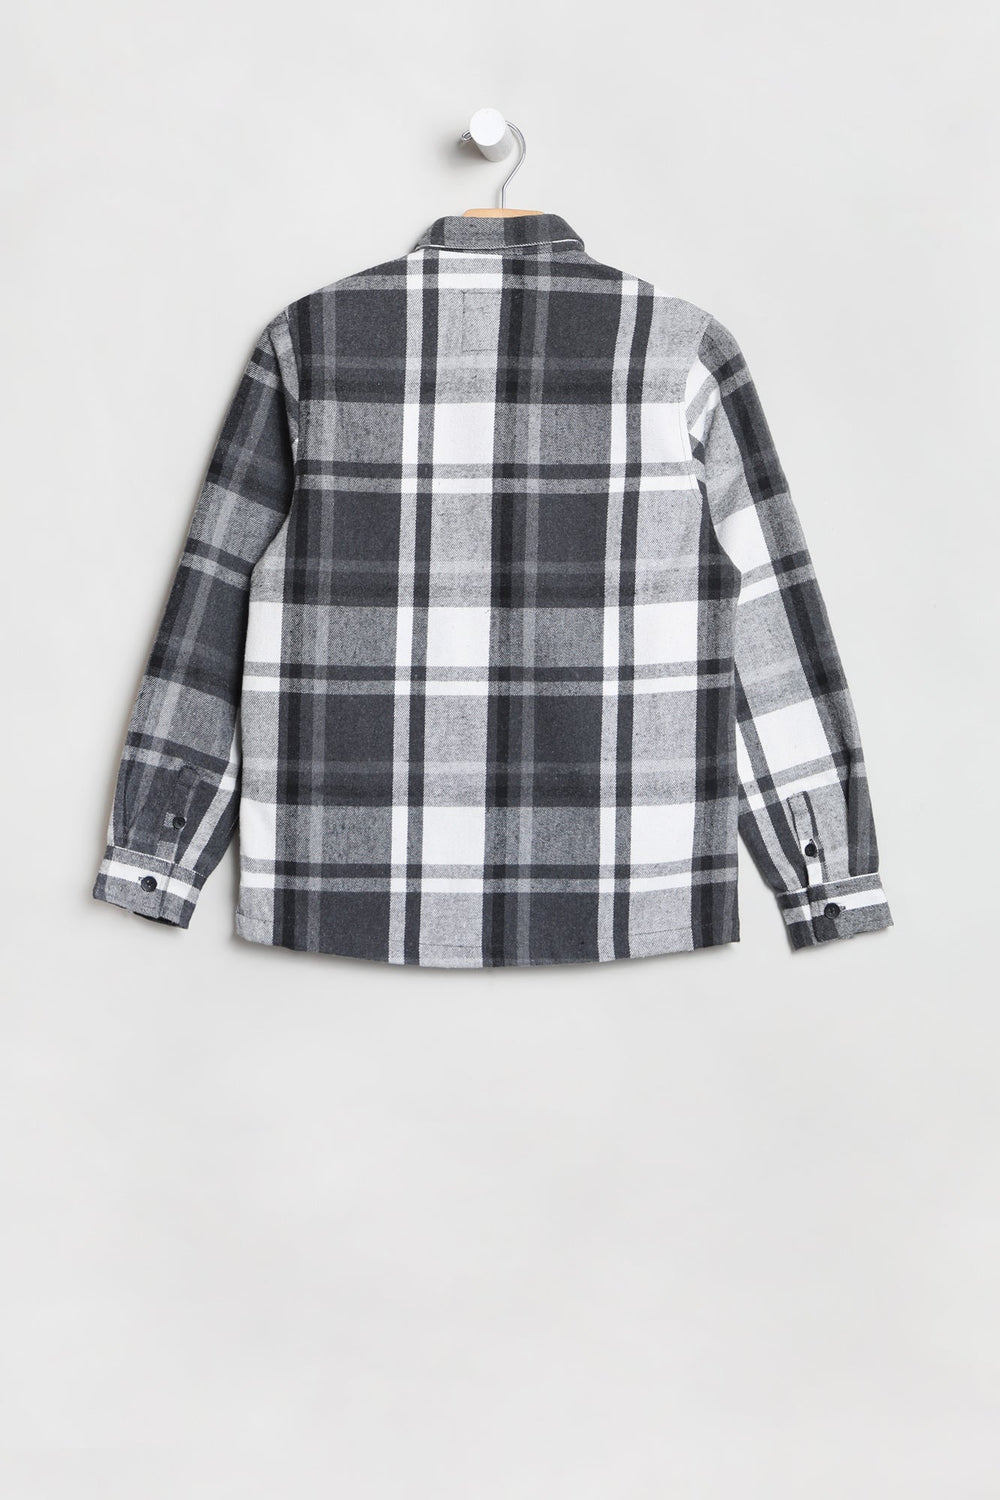 Amnesia Youth Plaid Button-Up Charcoal